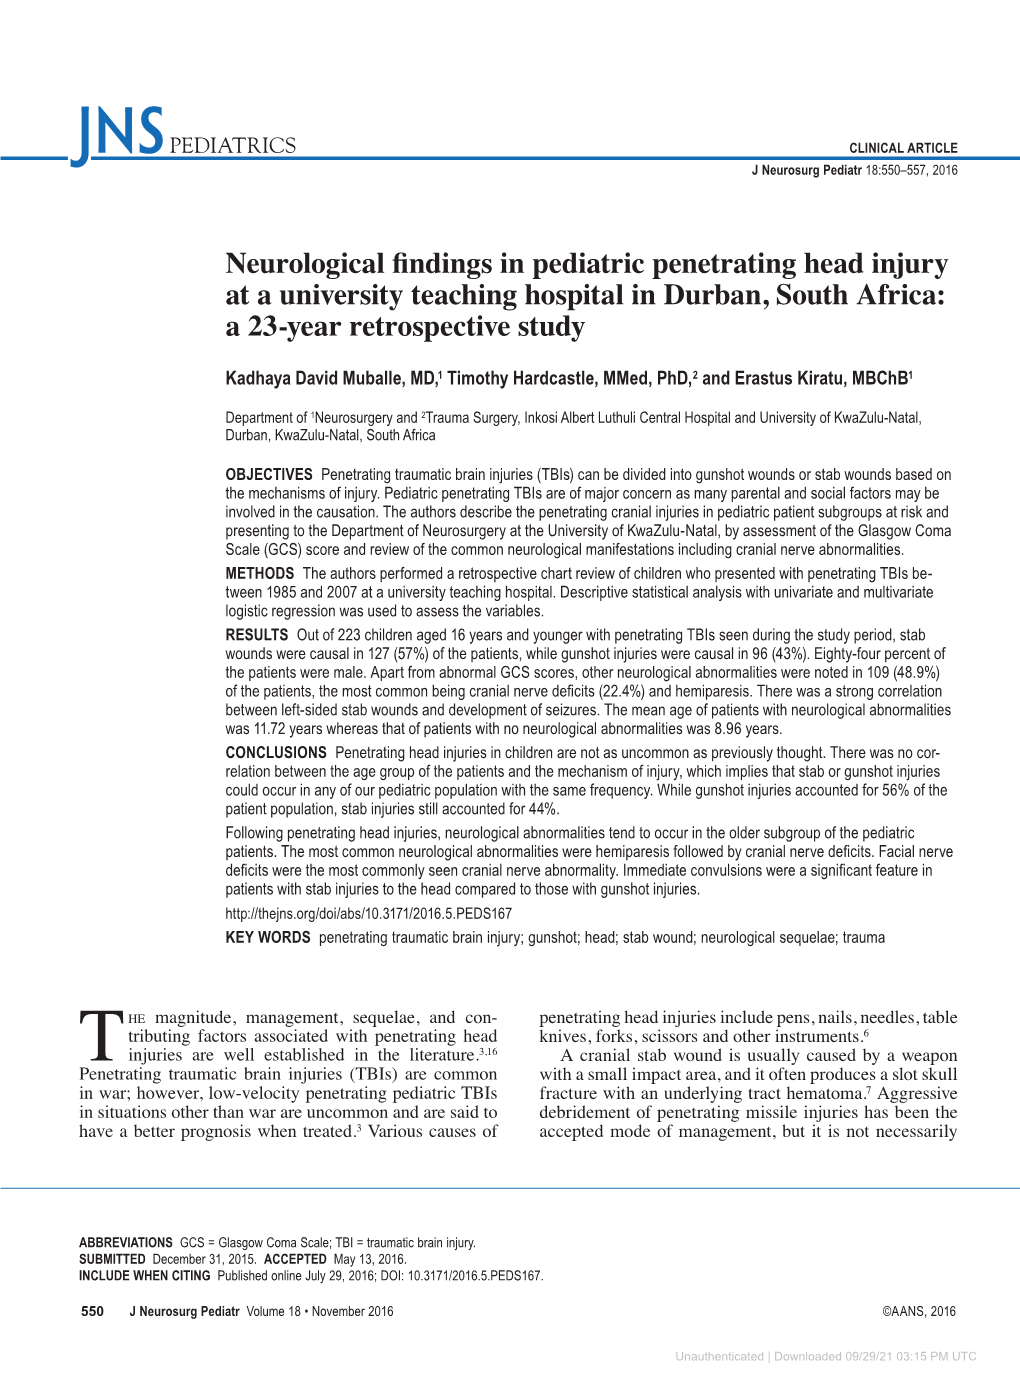 Neurological Findings in Pediatric Penetrating Head Injury at a University Teaching Hospital in Durban, South Africa: a 23-Year Retrospective Study